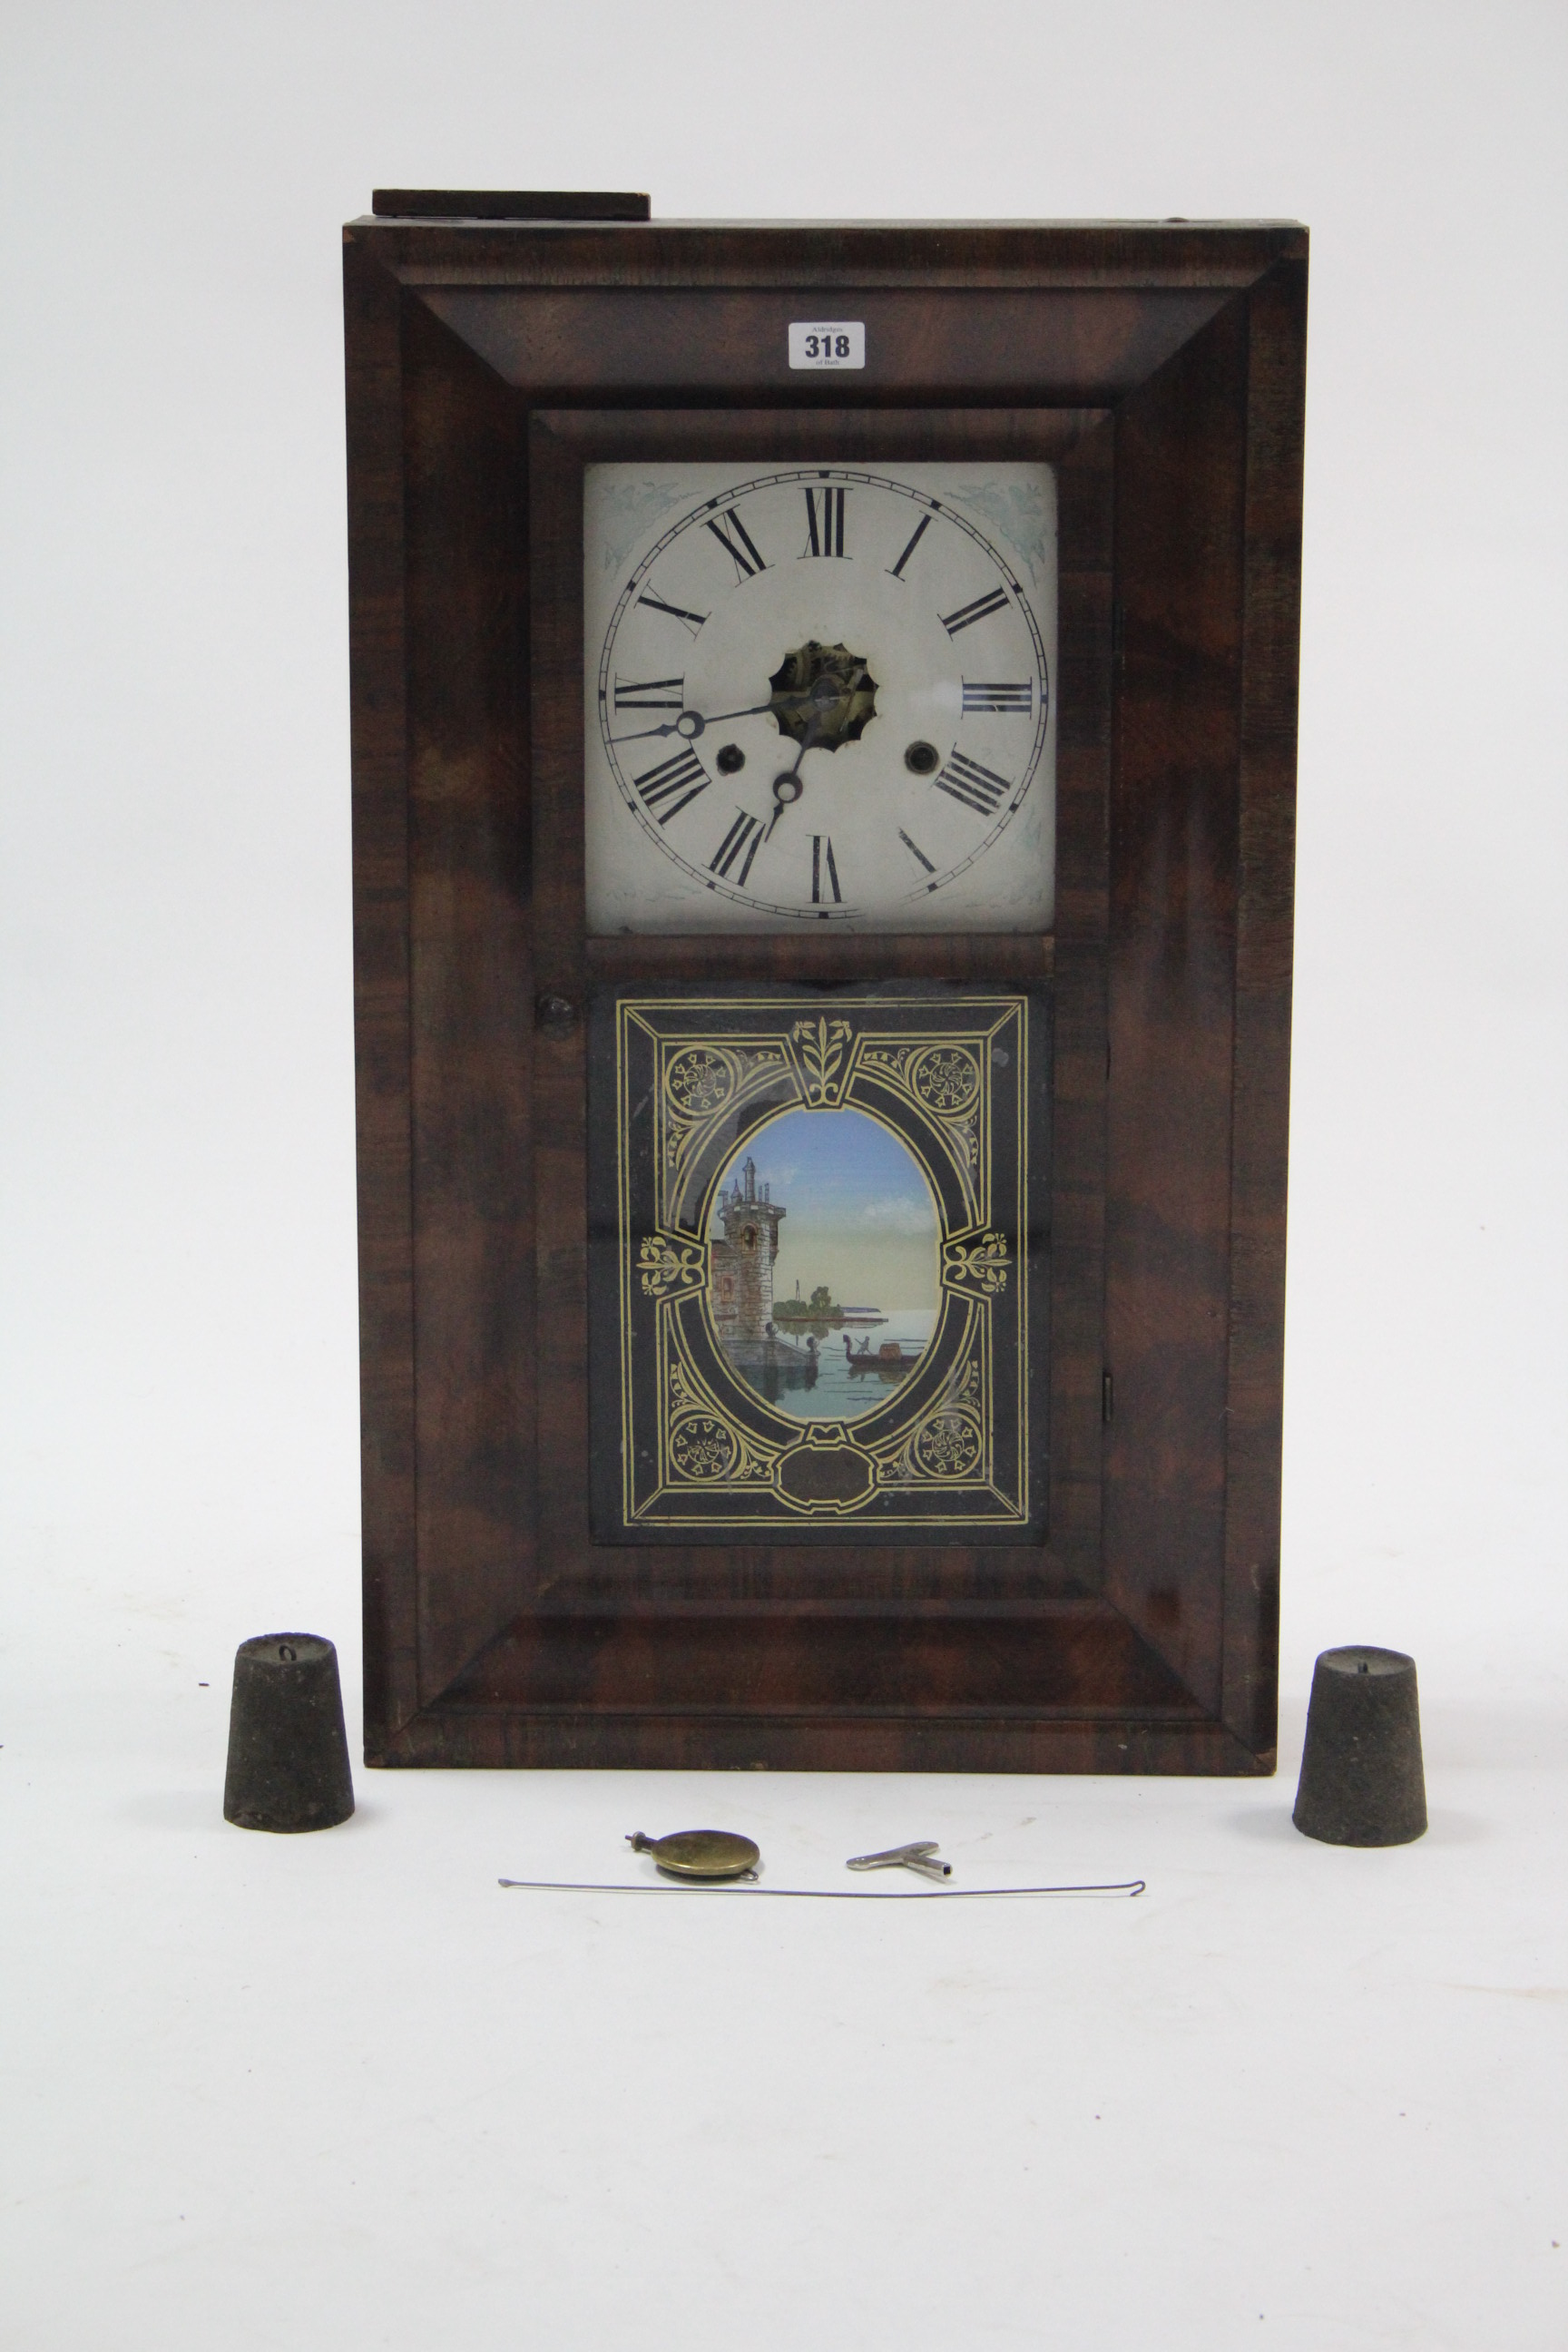 A late 19th century American thirty hour wall clock by Jerome & Co. of New Haven, with pictorial